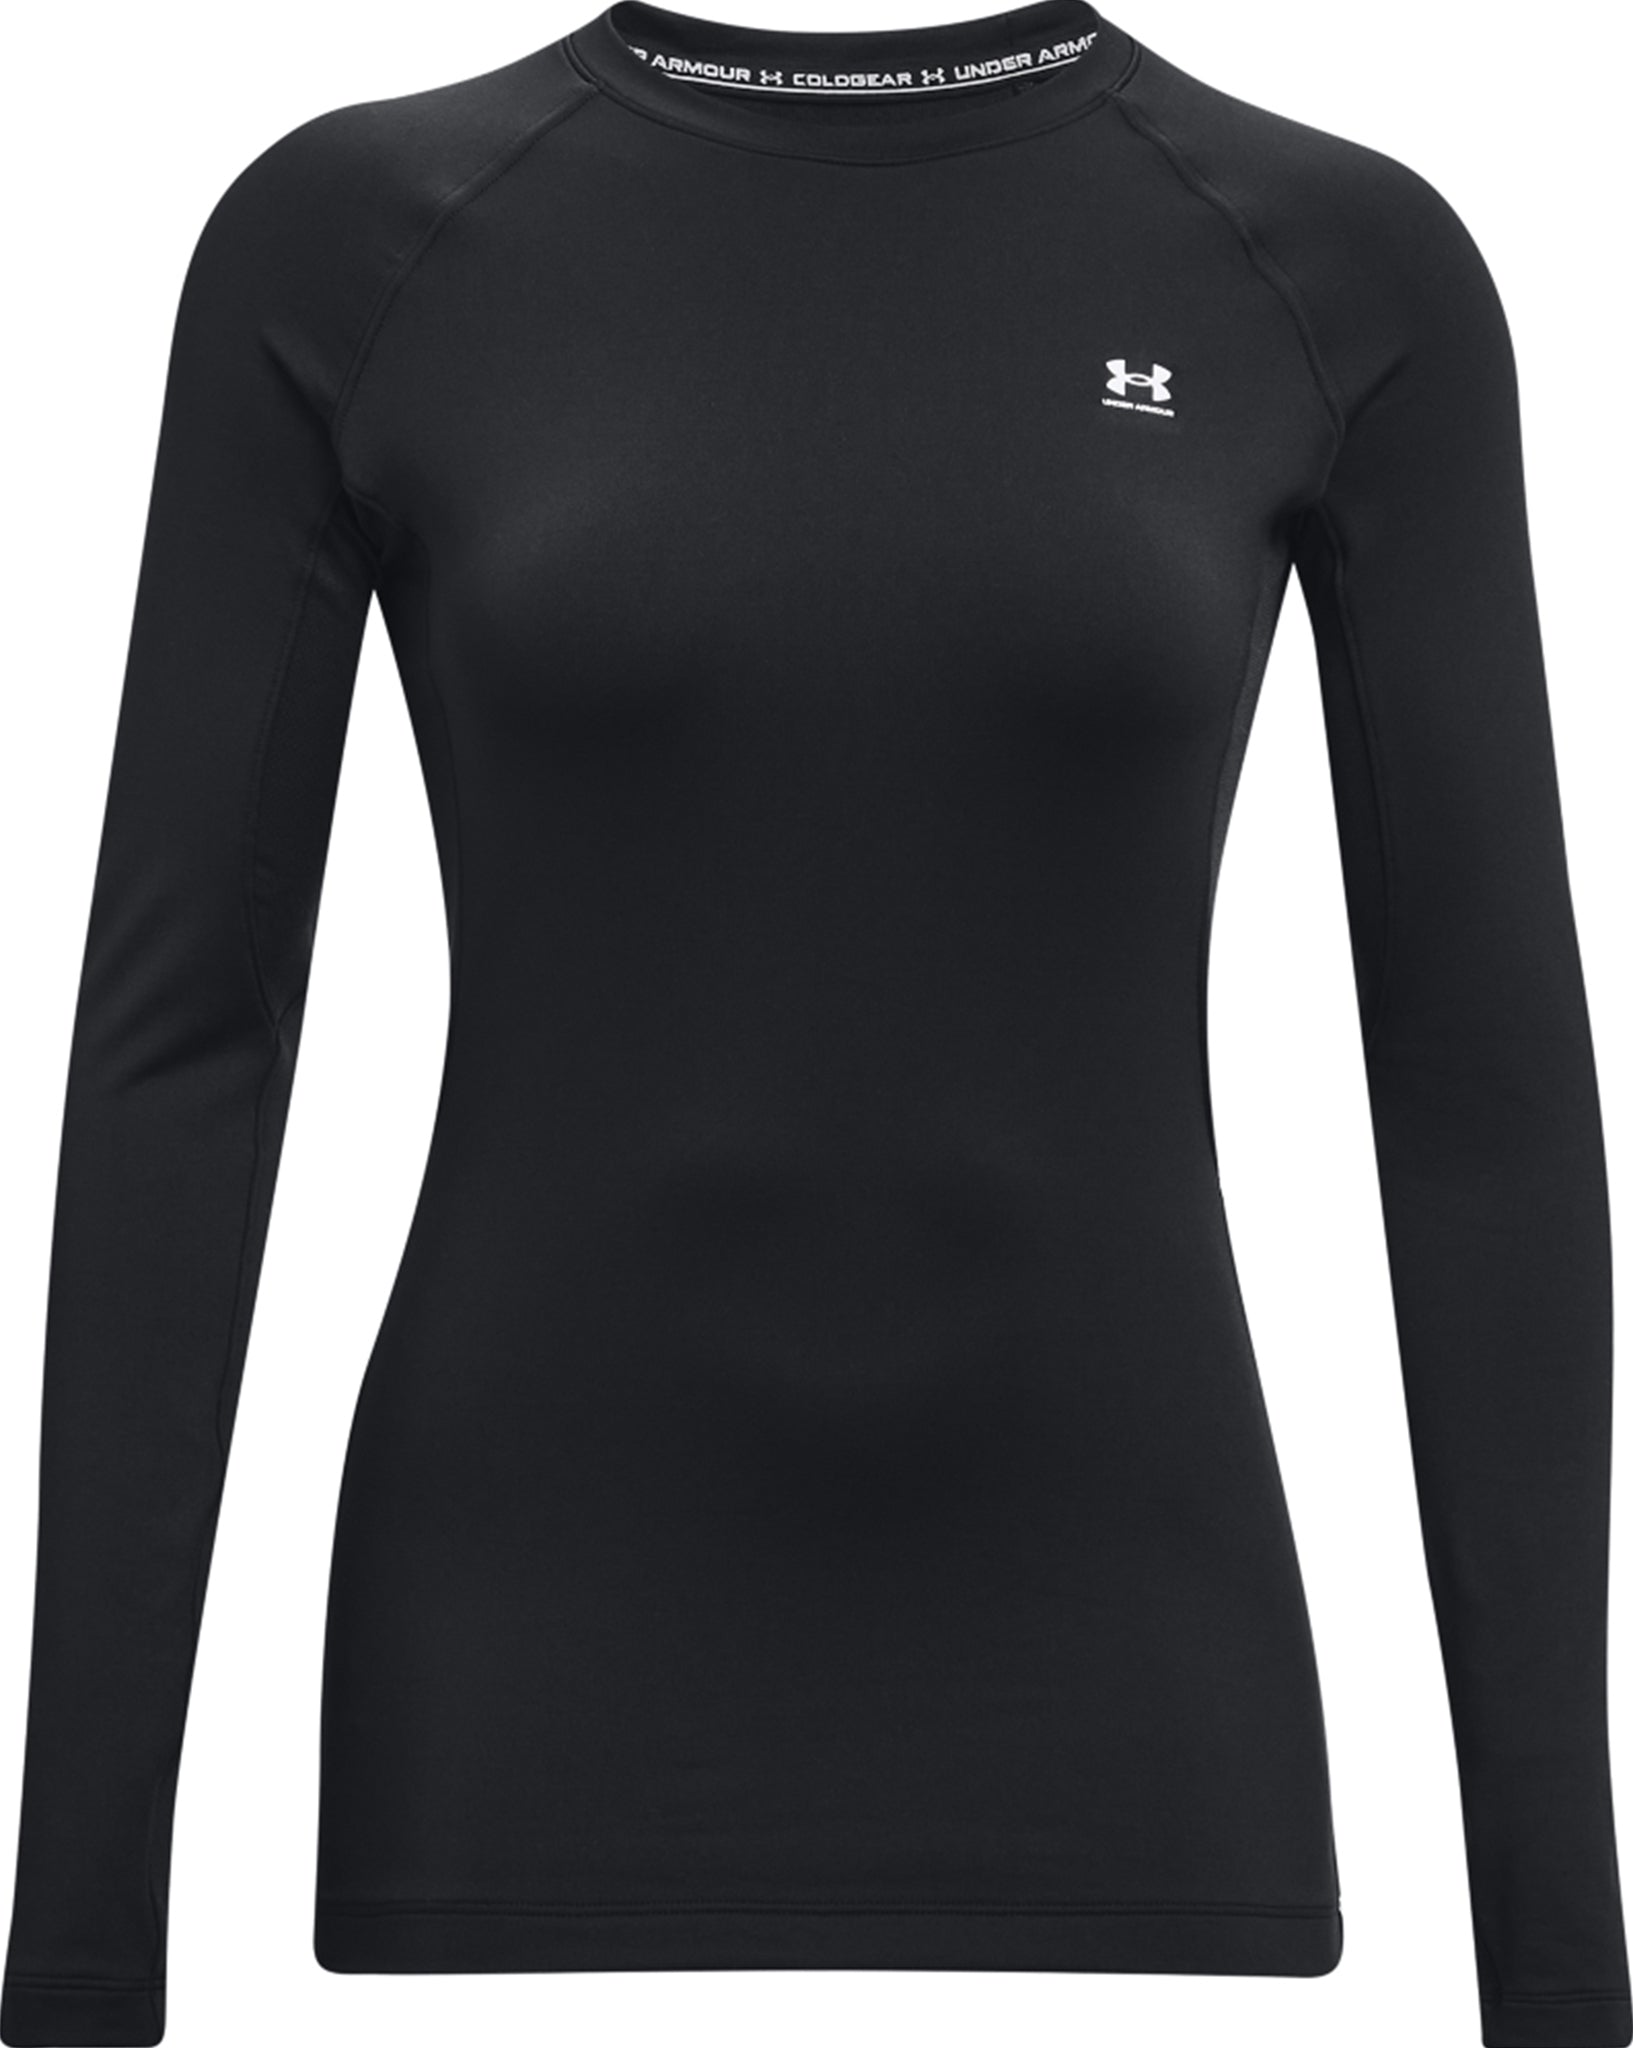 women's coldgear base layer - OFF-52% >Free Delivery